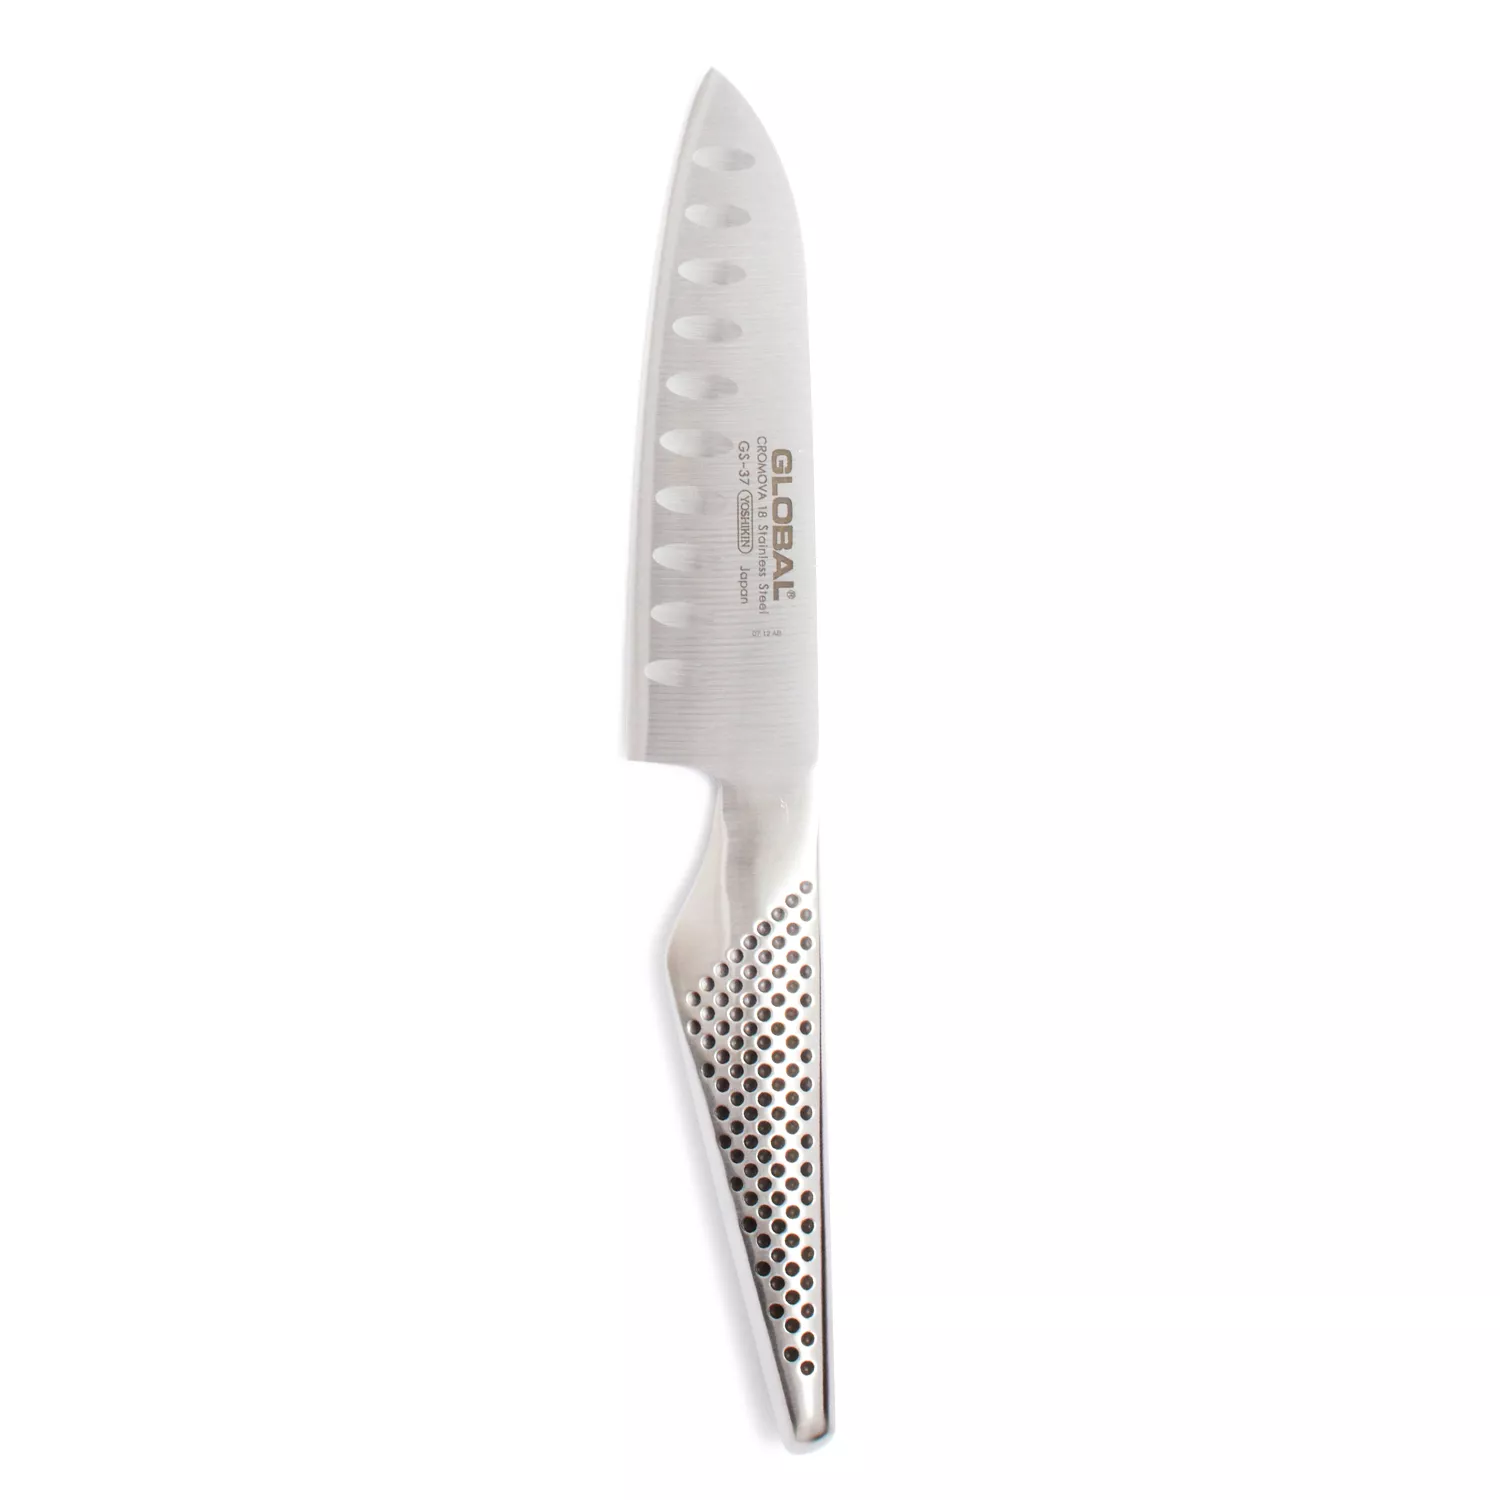 Calphalon Classic Select STAINLESS STEEL 5 Inch SANTOKU KNIFE LOWEST  PRICE* NEW